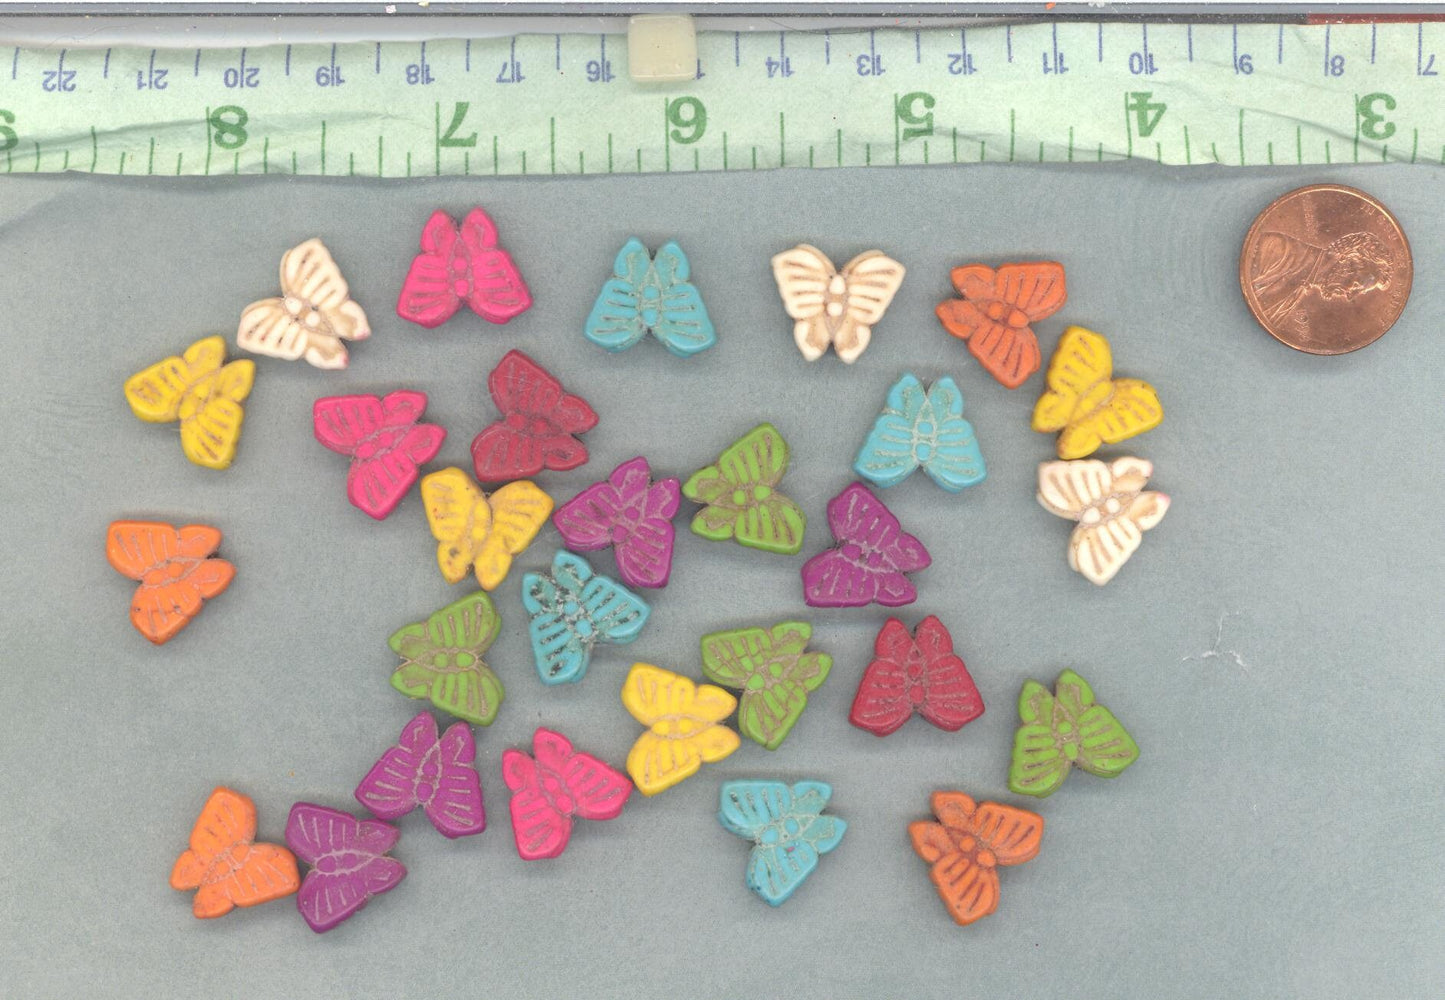 Colorful Butterfly Stone Beads - 12mmx 15mm - Choose Half Strand or Full Strand - Use for Mosaics